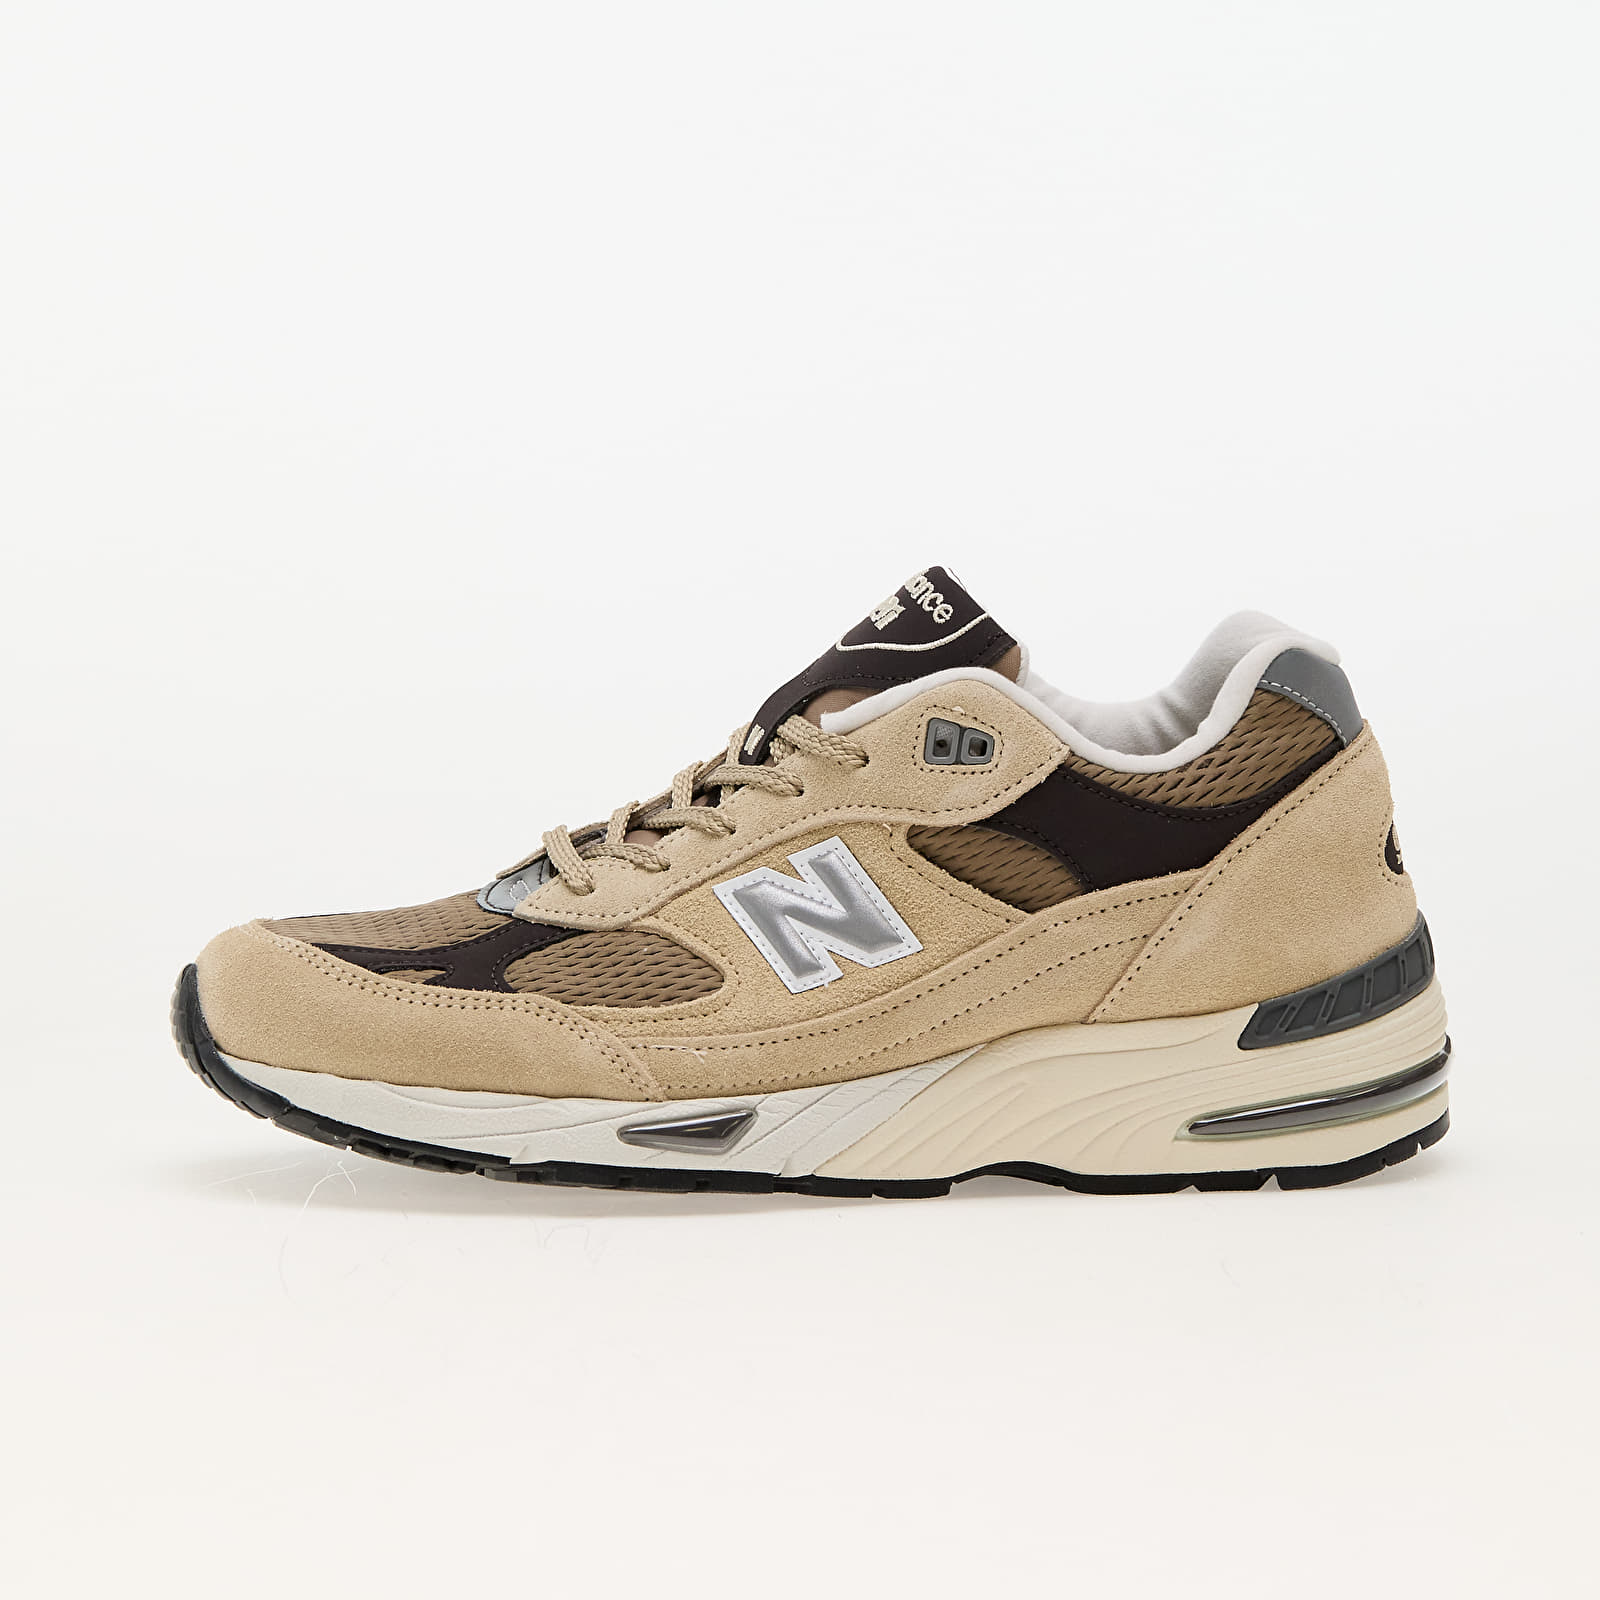 Zapatillas Hombre New Balance 991 Made in UK Beige